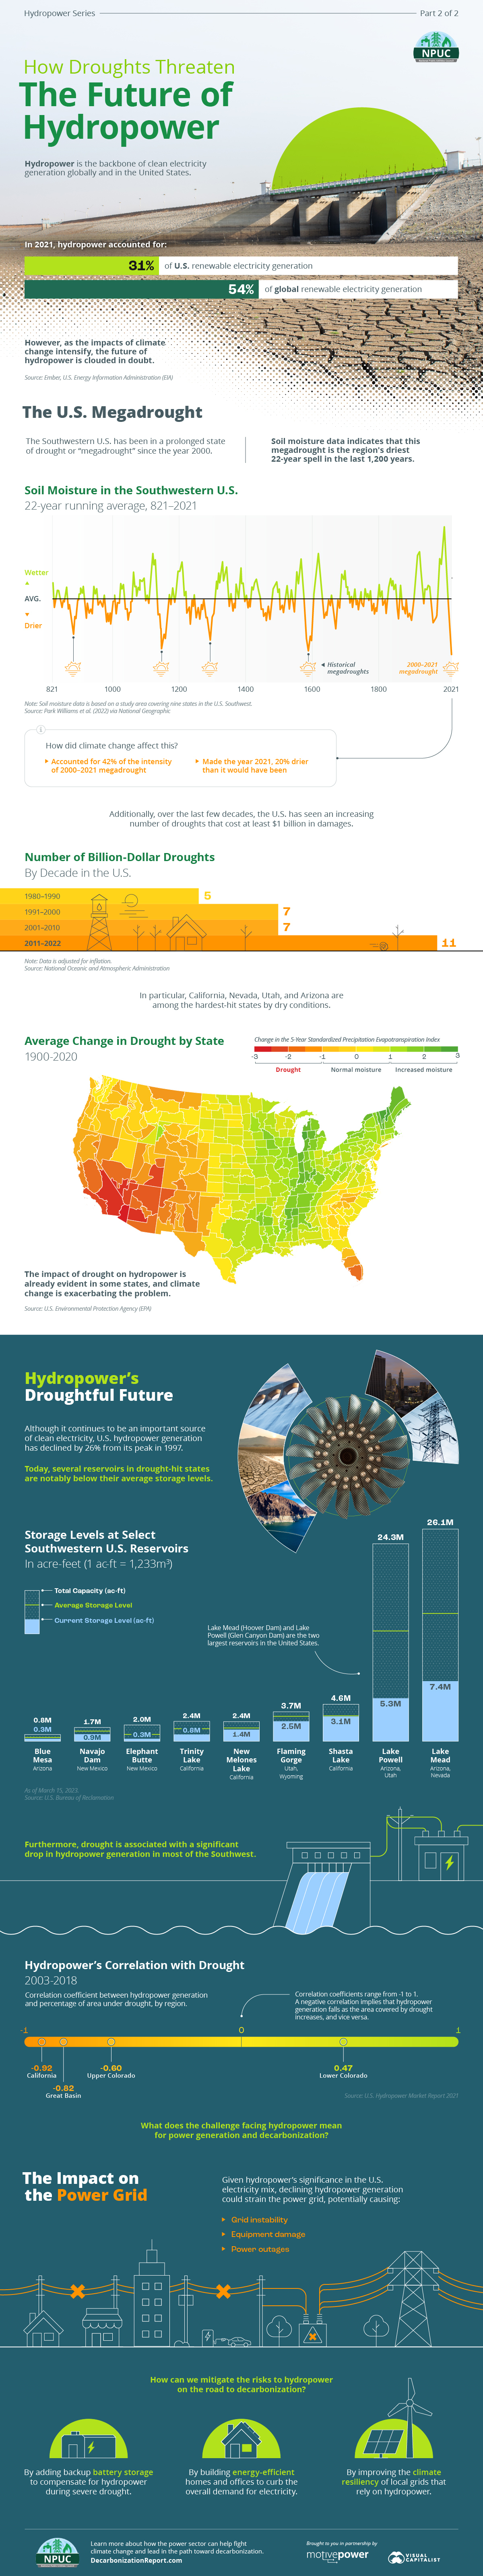 how droughts threaten the future of hydropower